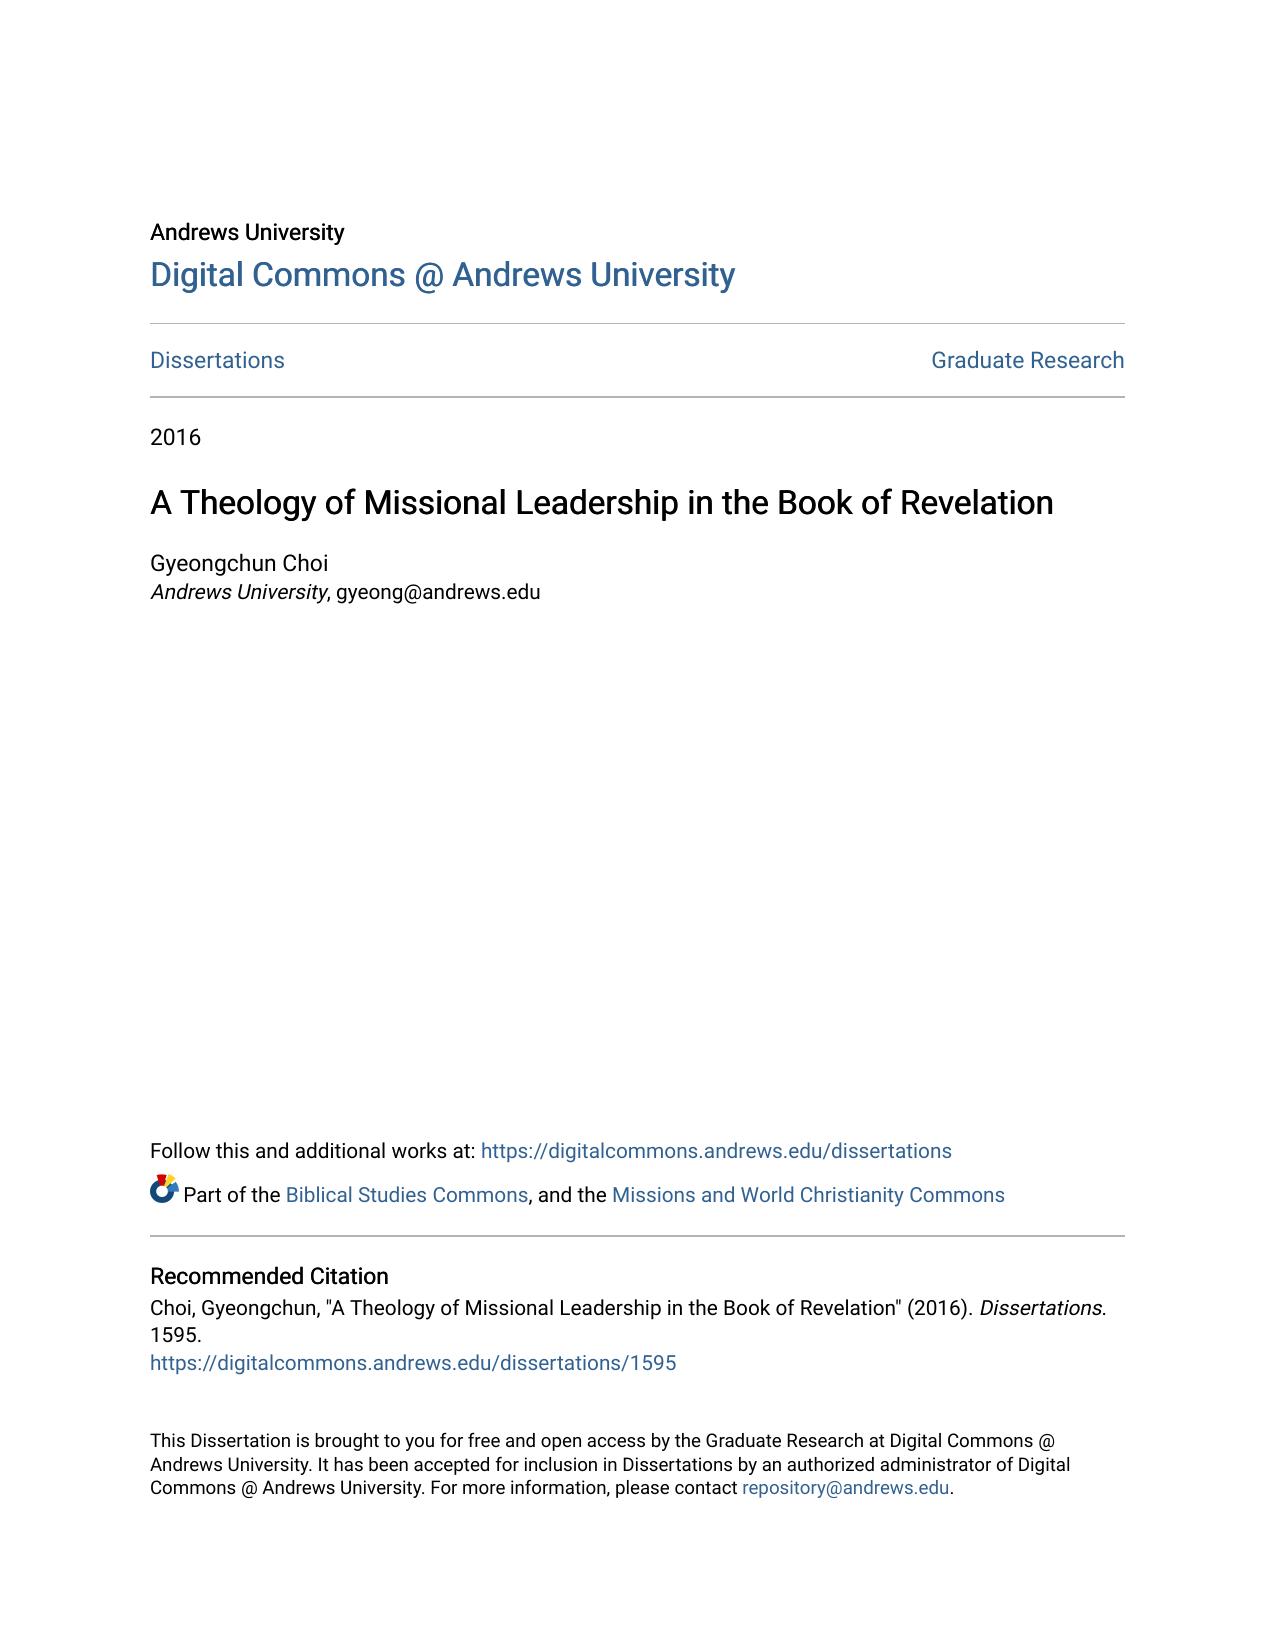 A Theology of Missional Leadership in the Book of Revelation